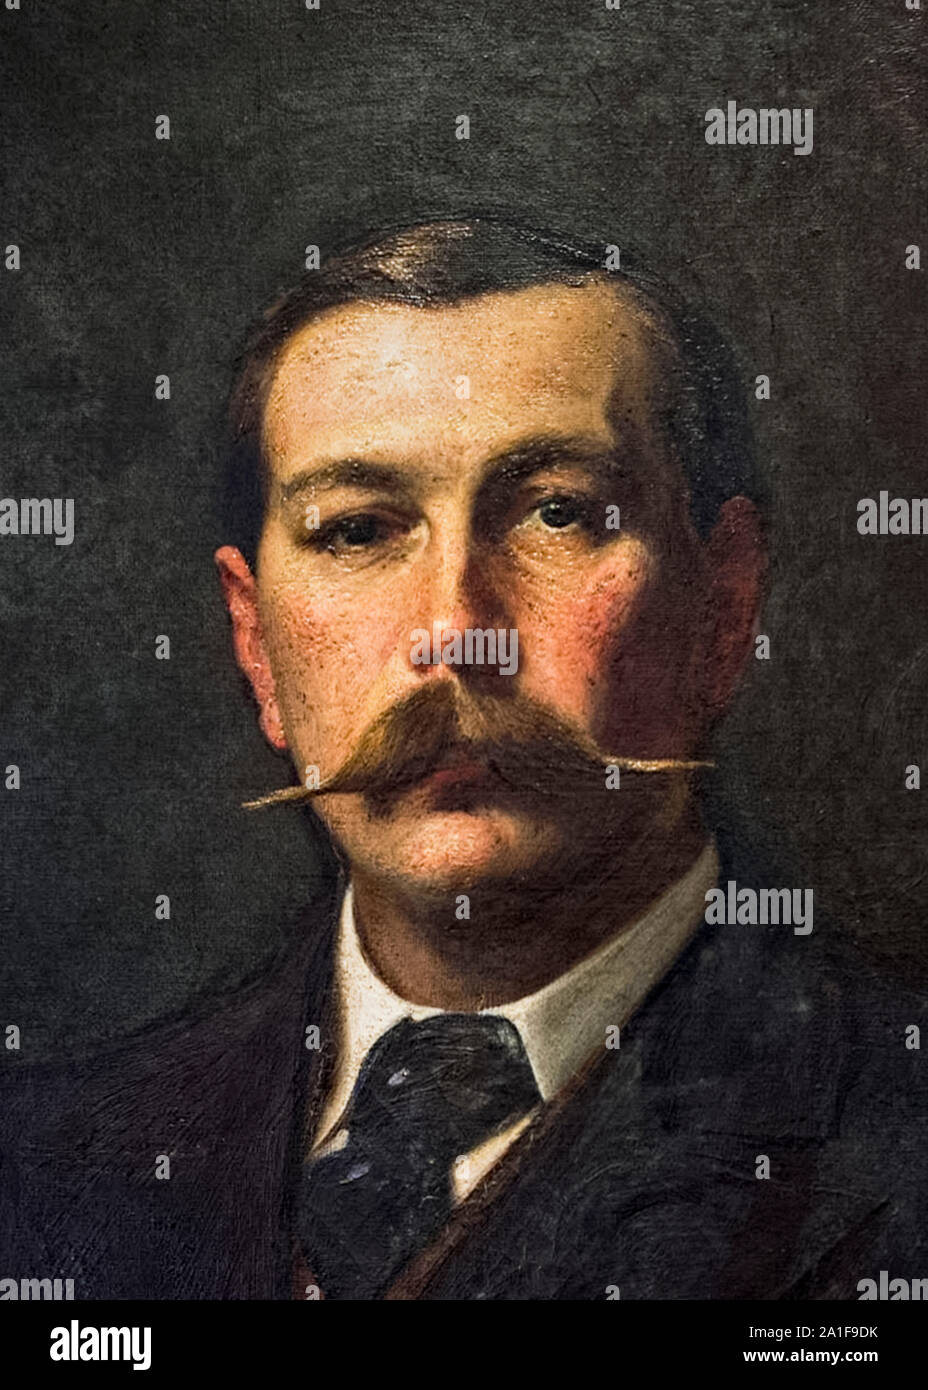 Sir Arthur Conan Doyle (1859-1930) British writer and creator of fictional detective Sherlock Holmes. Detail from an oil painting by Sidney Paget (1860-1908) who illustrated the Sherlock Holmes stories when first serialised in The Strand Magazine. Stock Photo